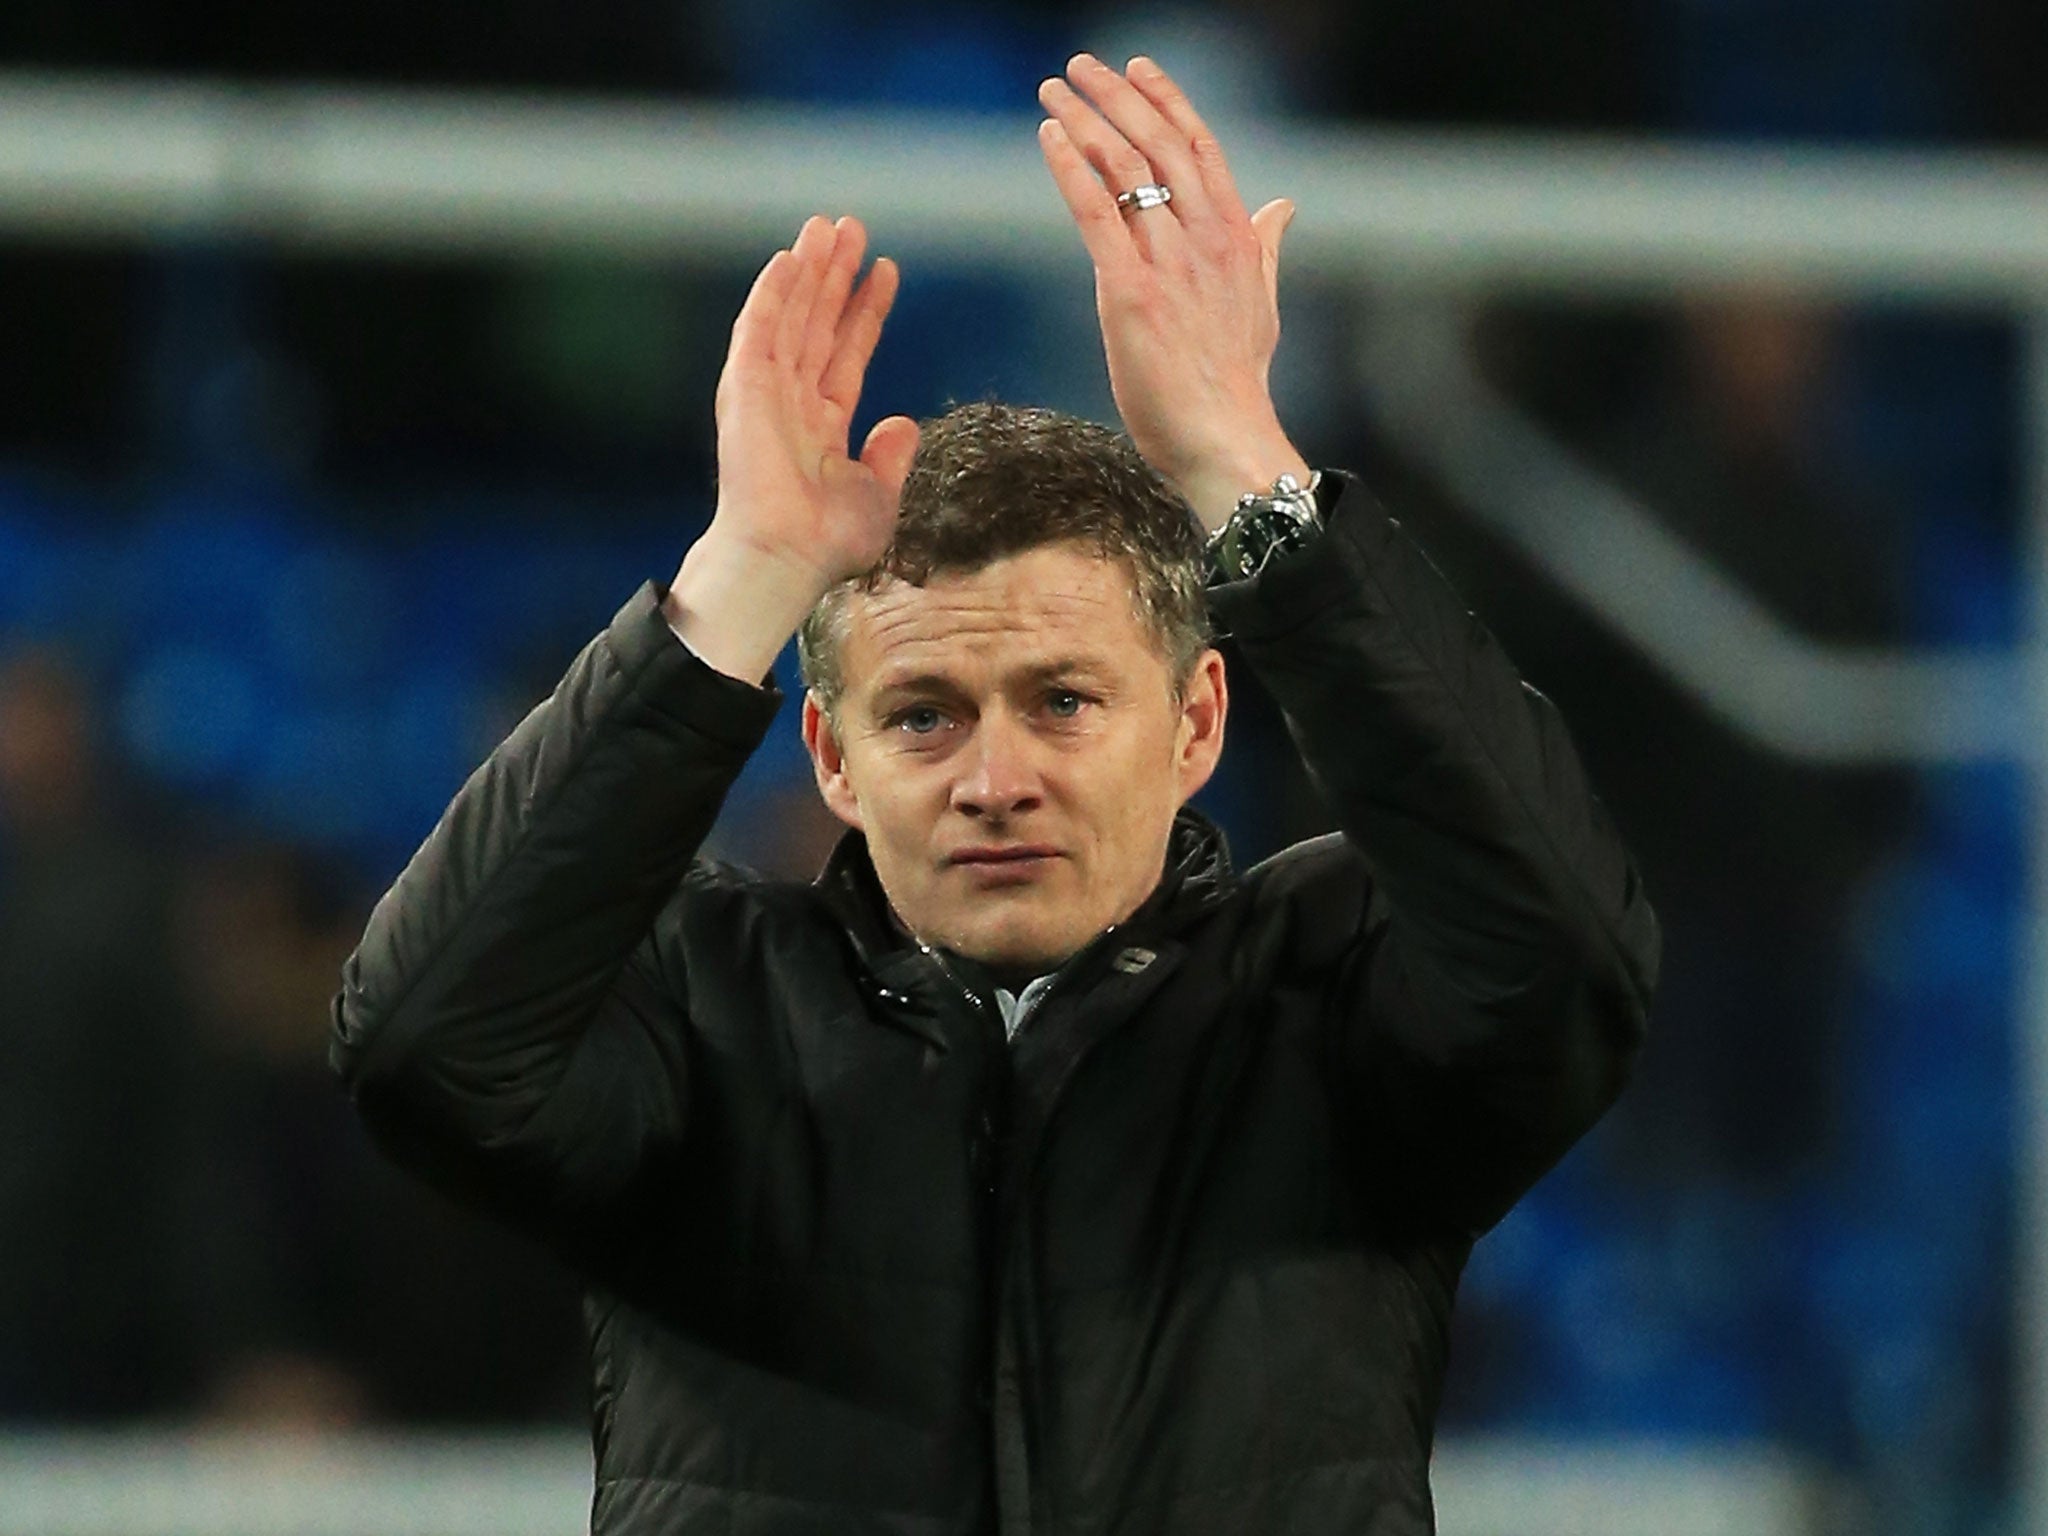 Ole Gunnar Solskjaer will be hoping for a good result in the FA Cup against Bolton